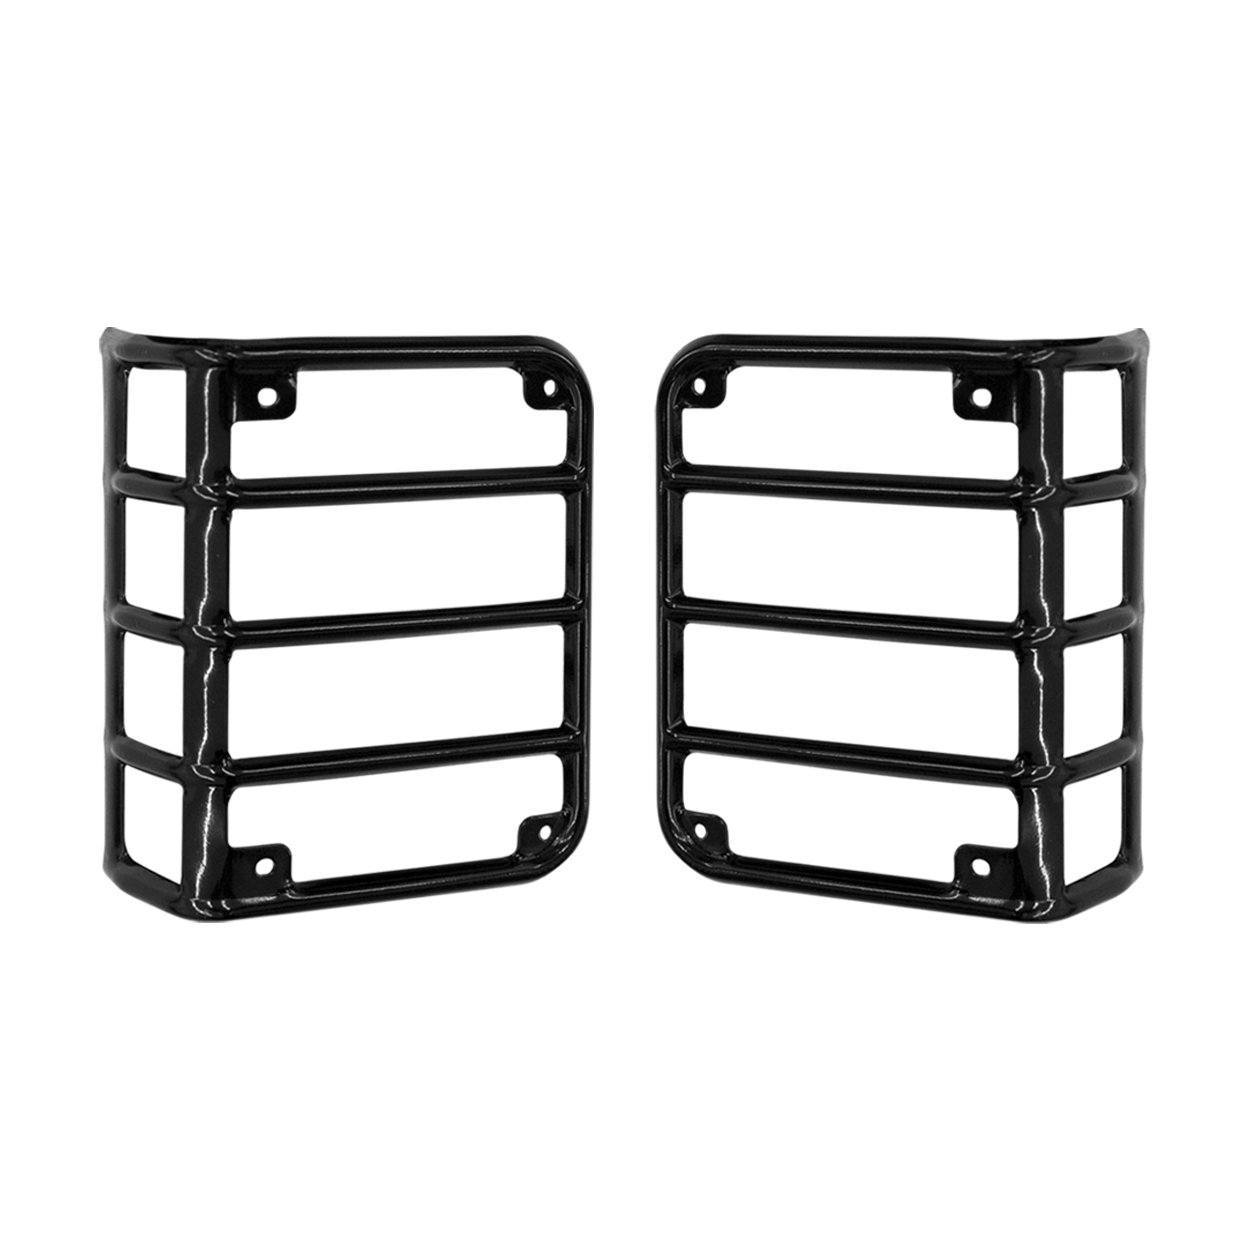 ALUMINUM DOOR GRAB HANDLE INSERTS & BLACK GAS FUEL TANK COVER & BLACK EURO TAIL LIGHT COVERS & GLOSSY BLACK CLIP-IN MESH GRILL INSERTS COMBO FOR 07-18 JEEP WRANGLER JK/JKU